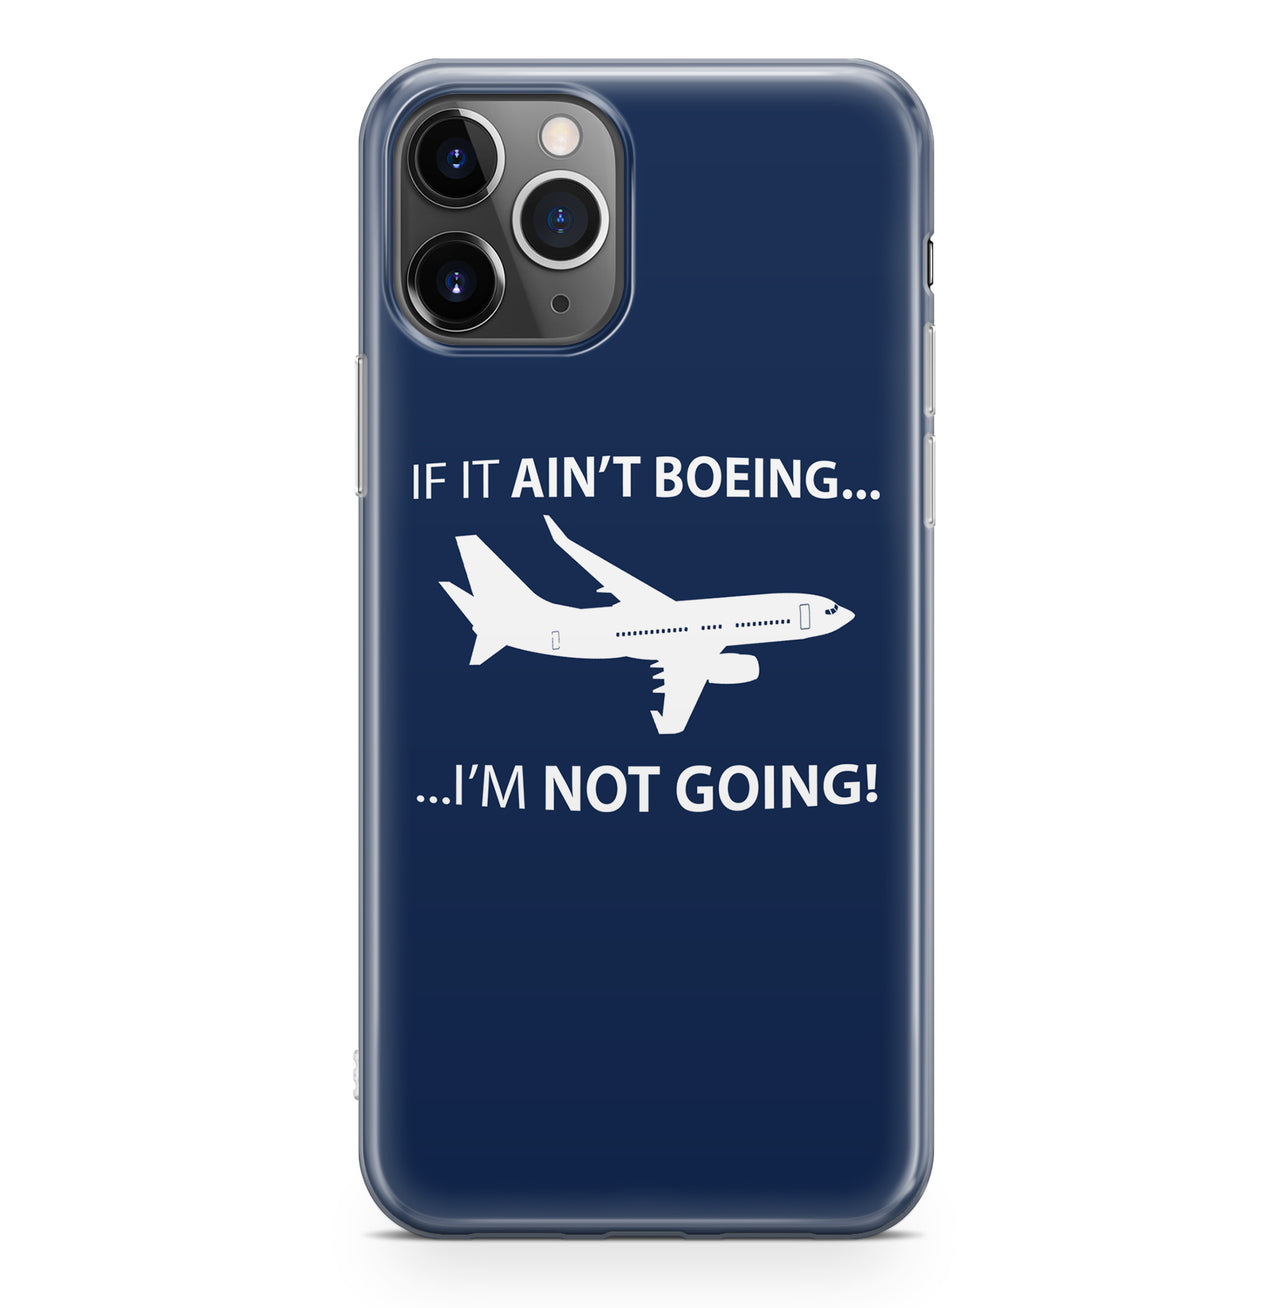 If It Ain't Boeing I'm Not Going! Designed iPhone Cases